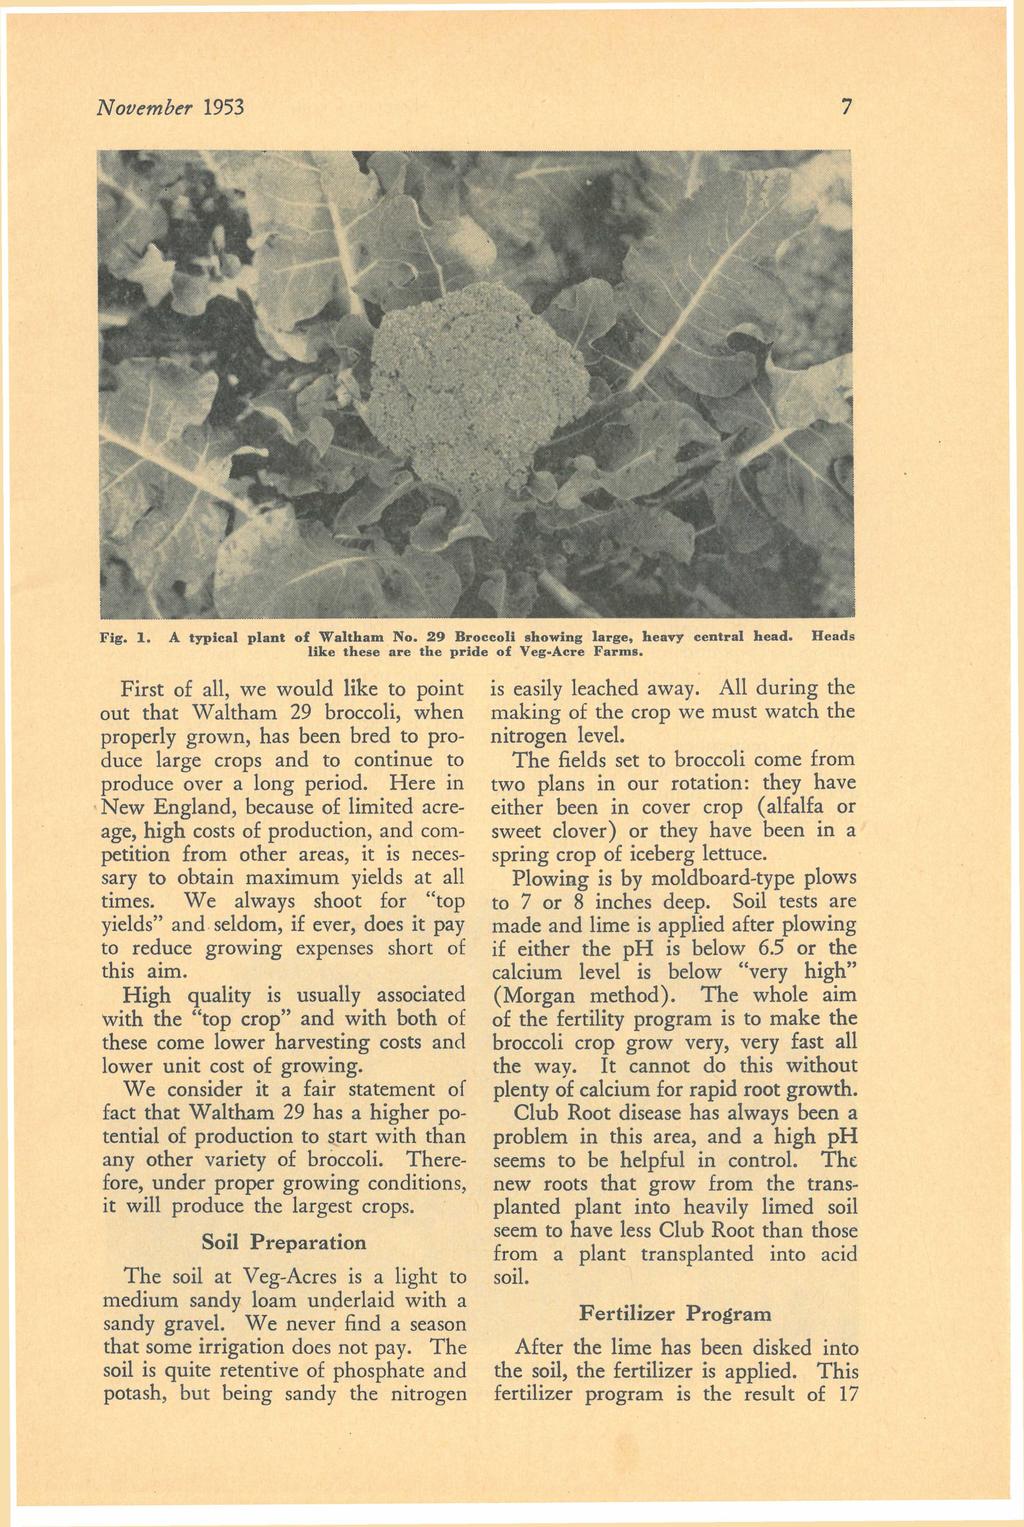 November Fig. 1. 7 1953 A typical plant of Waltham No. 29 Broccoli showing large, heavy central head. like these are the pride of Veg-Acre Farms.